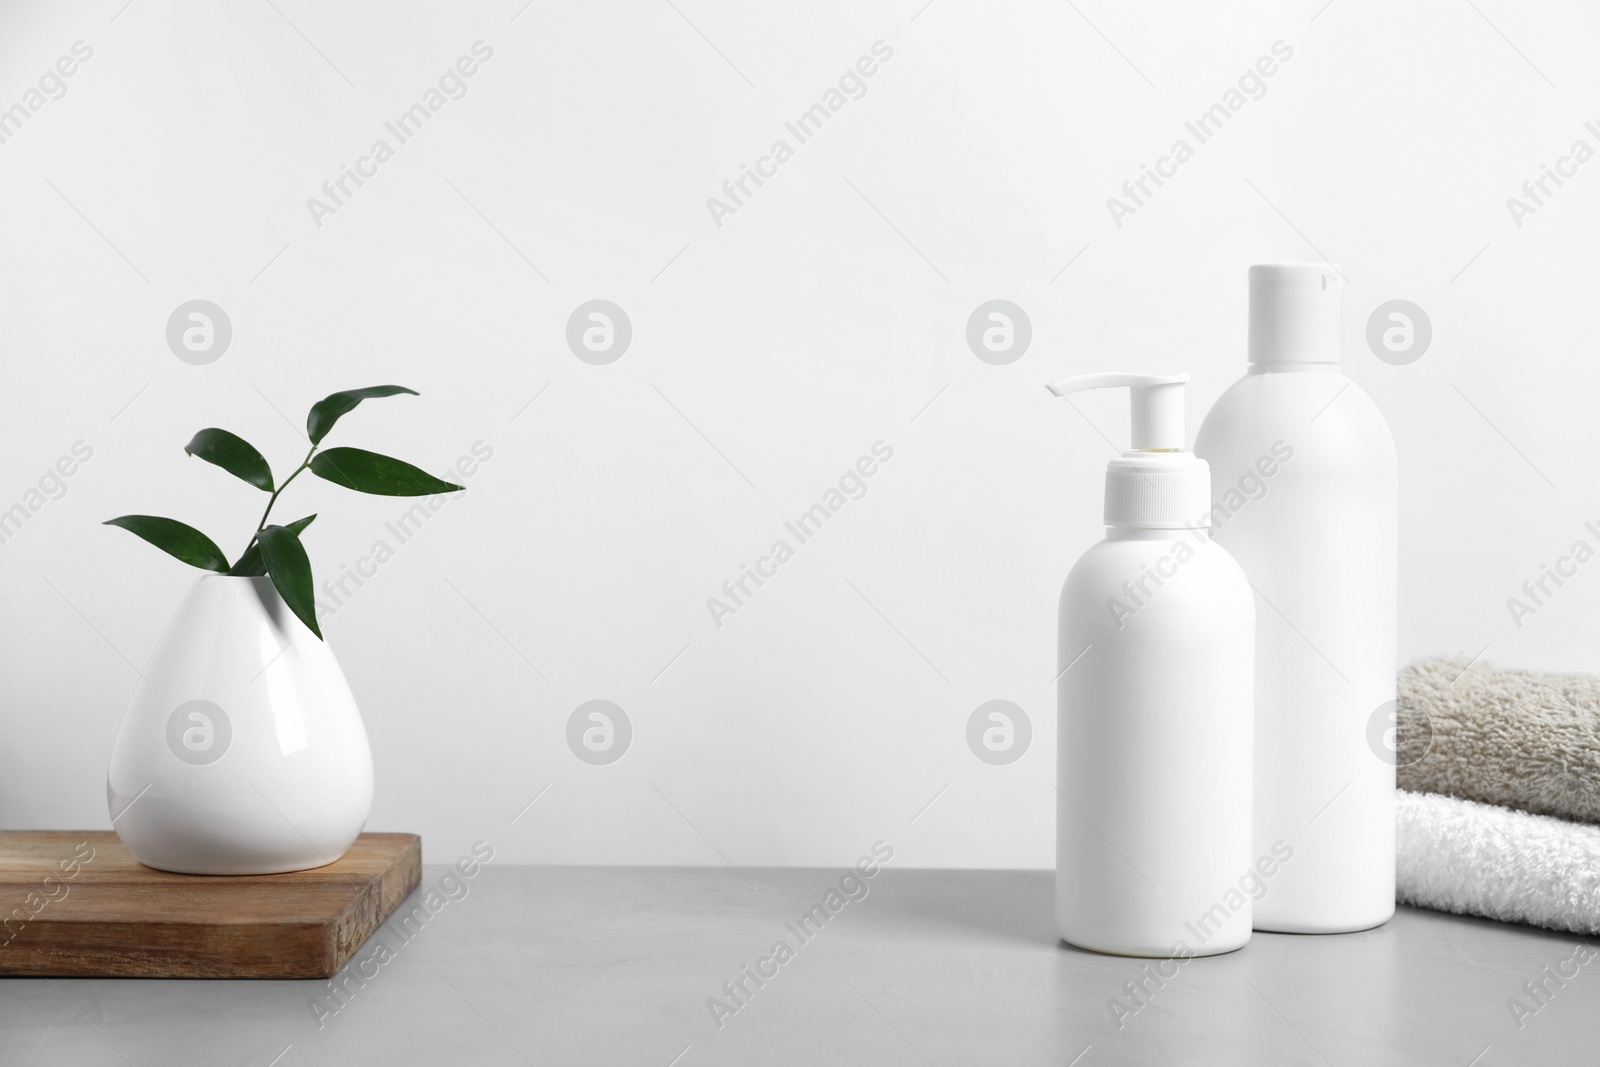 Photo of Bottles with different cosmetic products and green leaves in vase on light grey table against white background, space for text